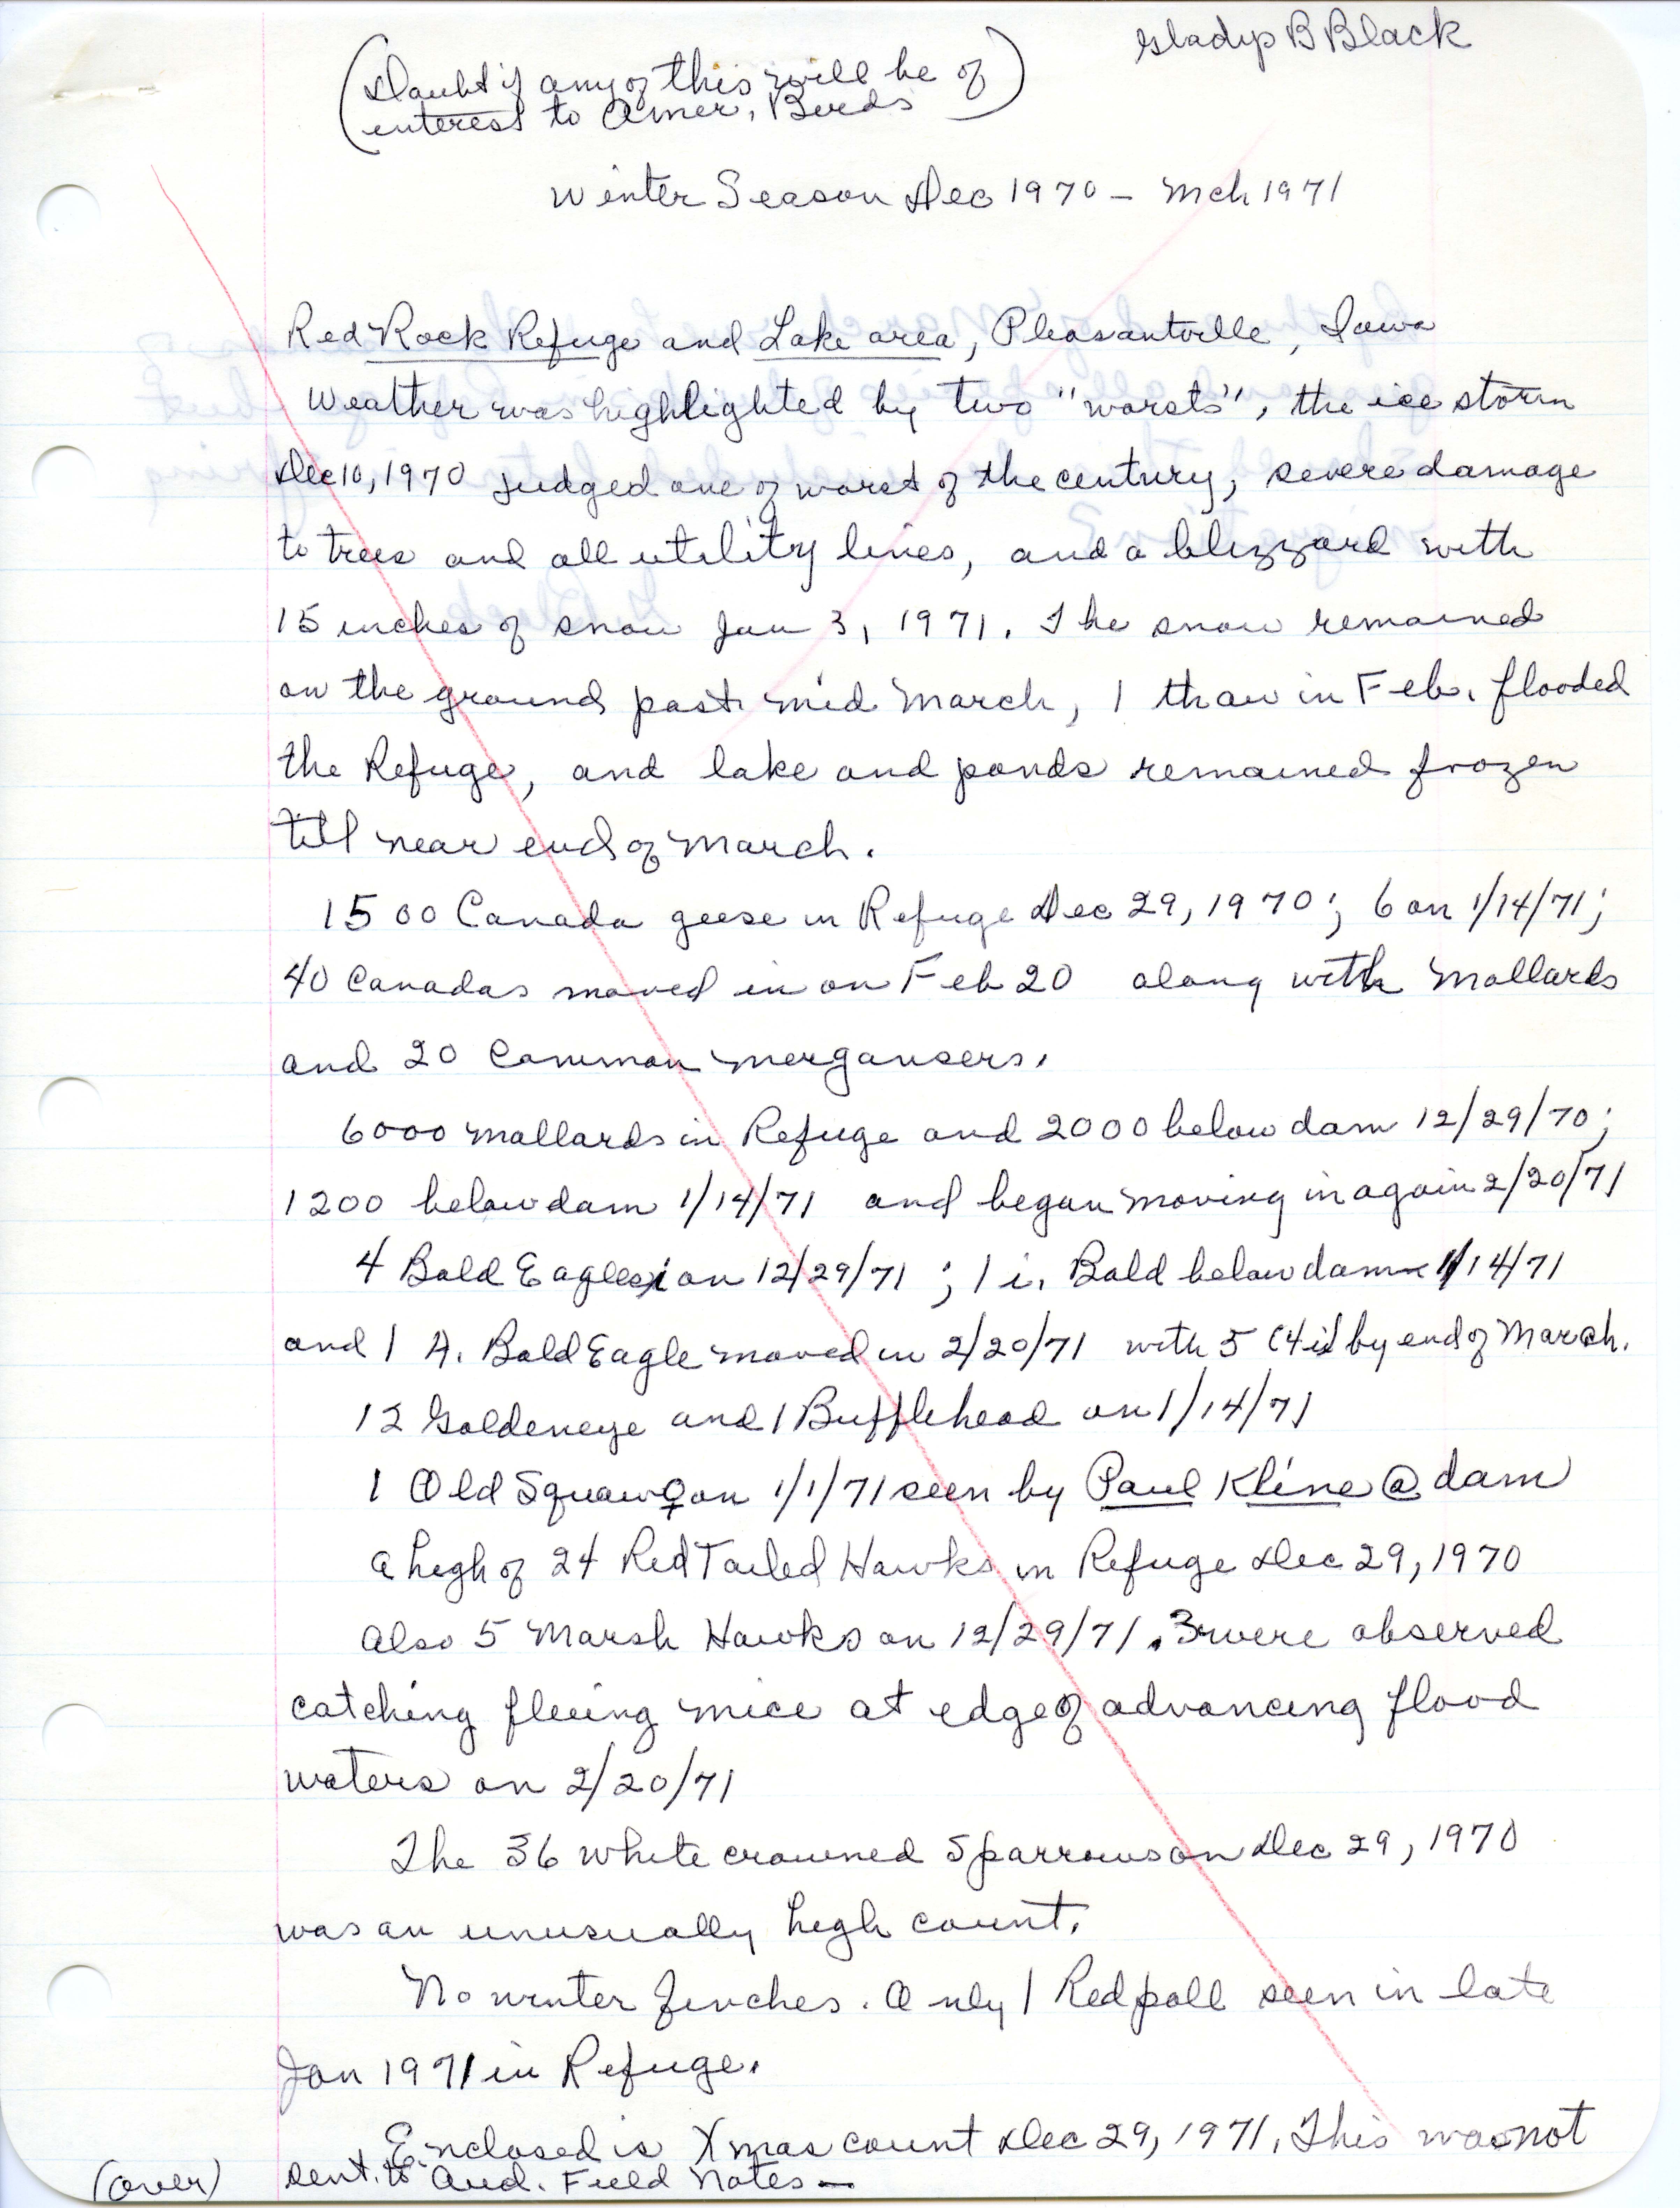 Report from Red Rock Refuge and Lake area, Pleasantville, Iowa, winter season, December 1970-March 1971